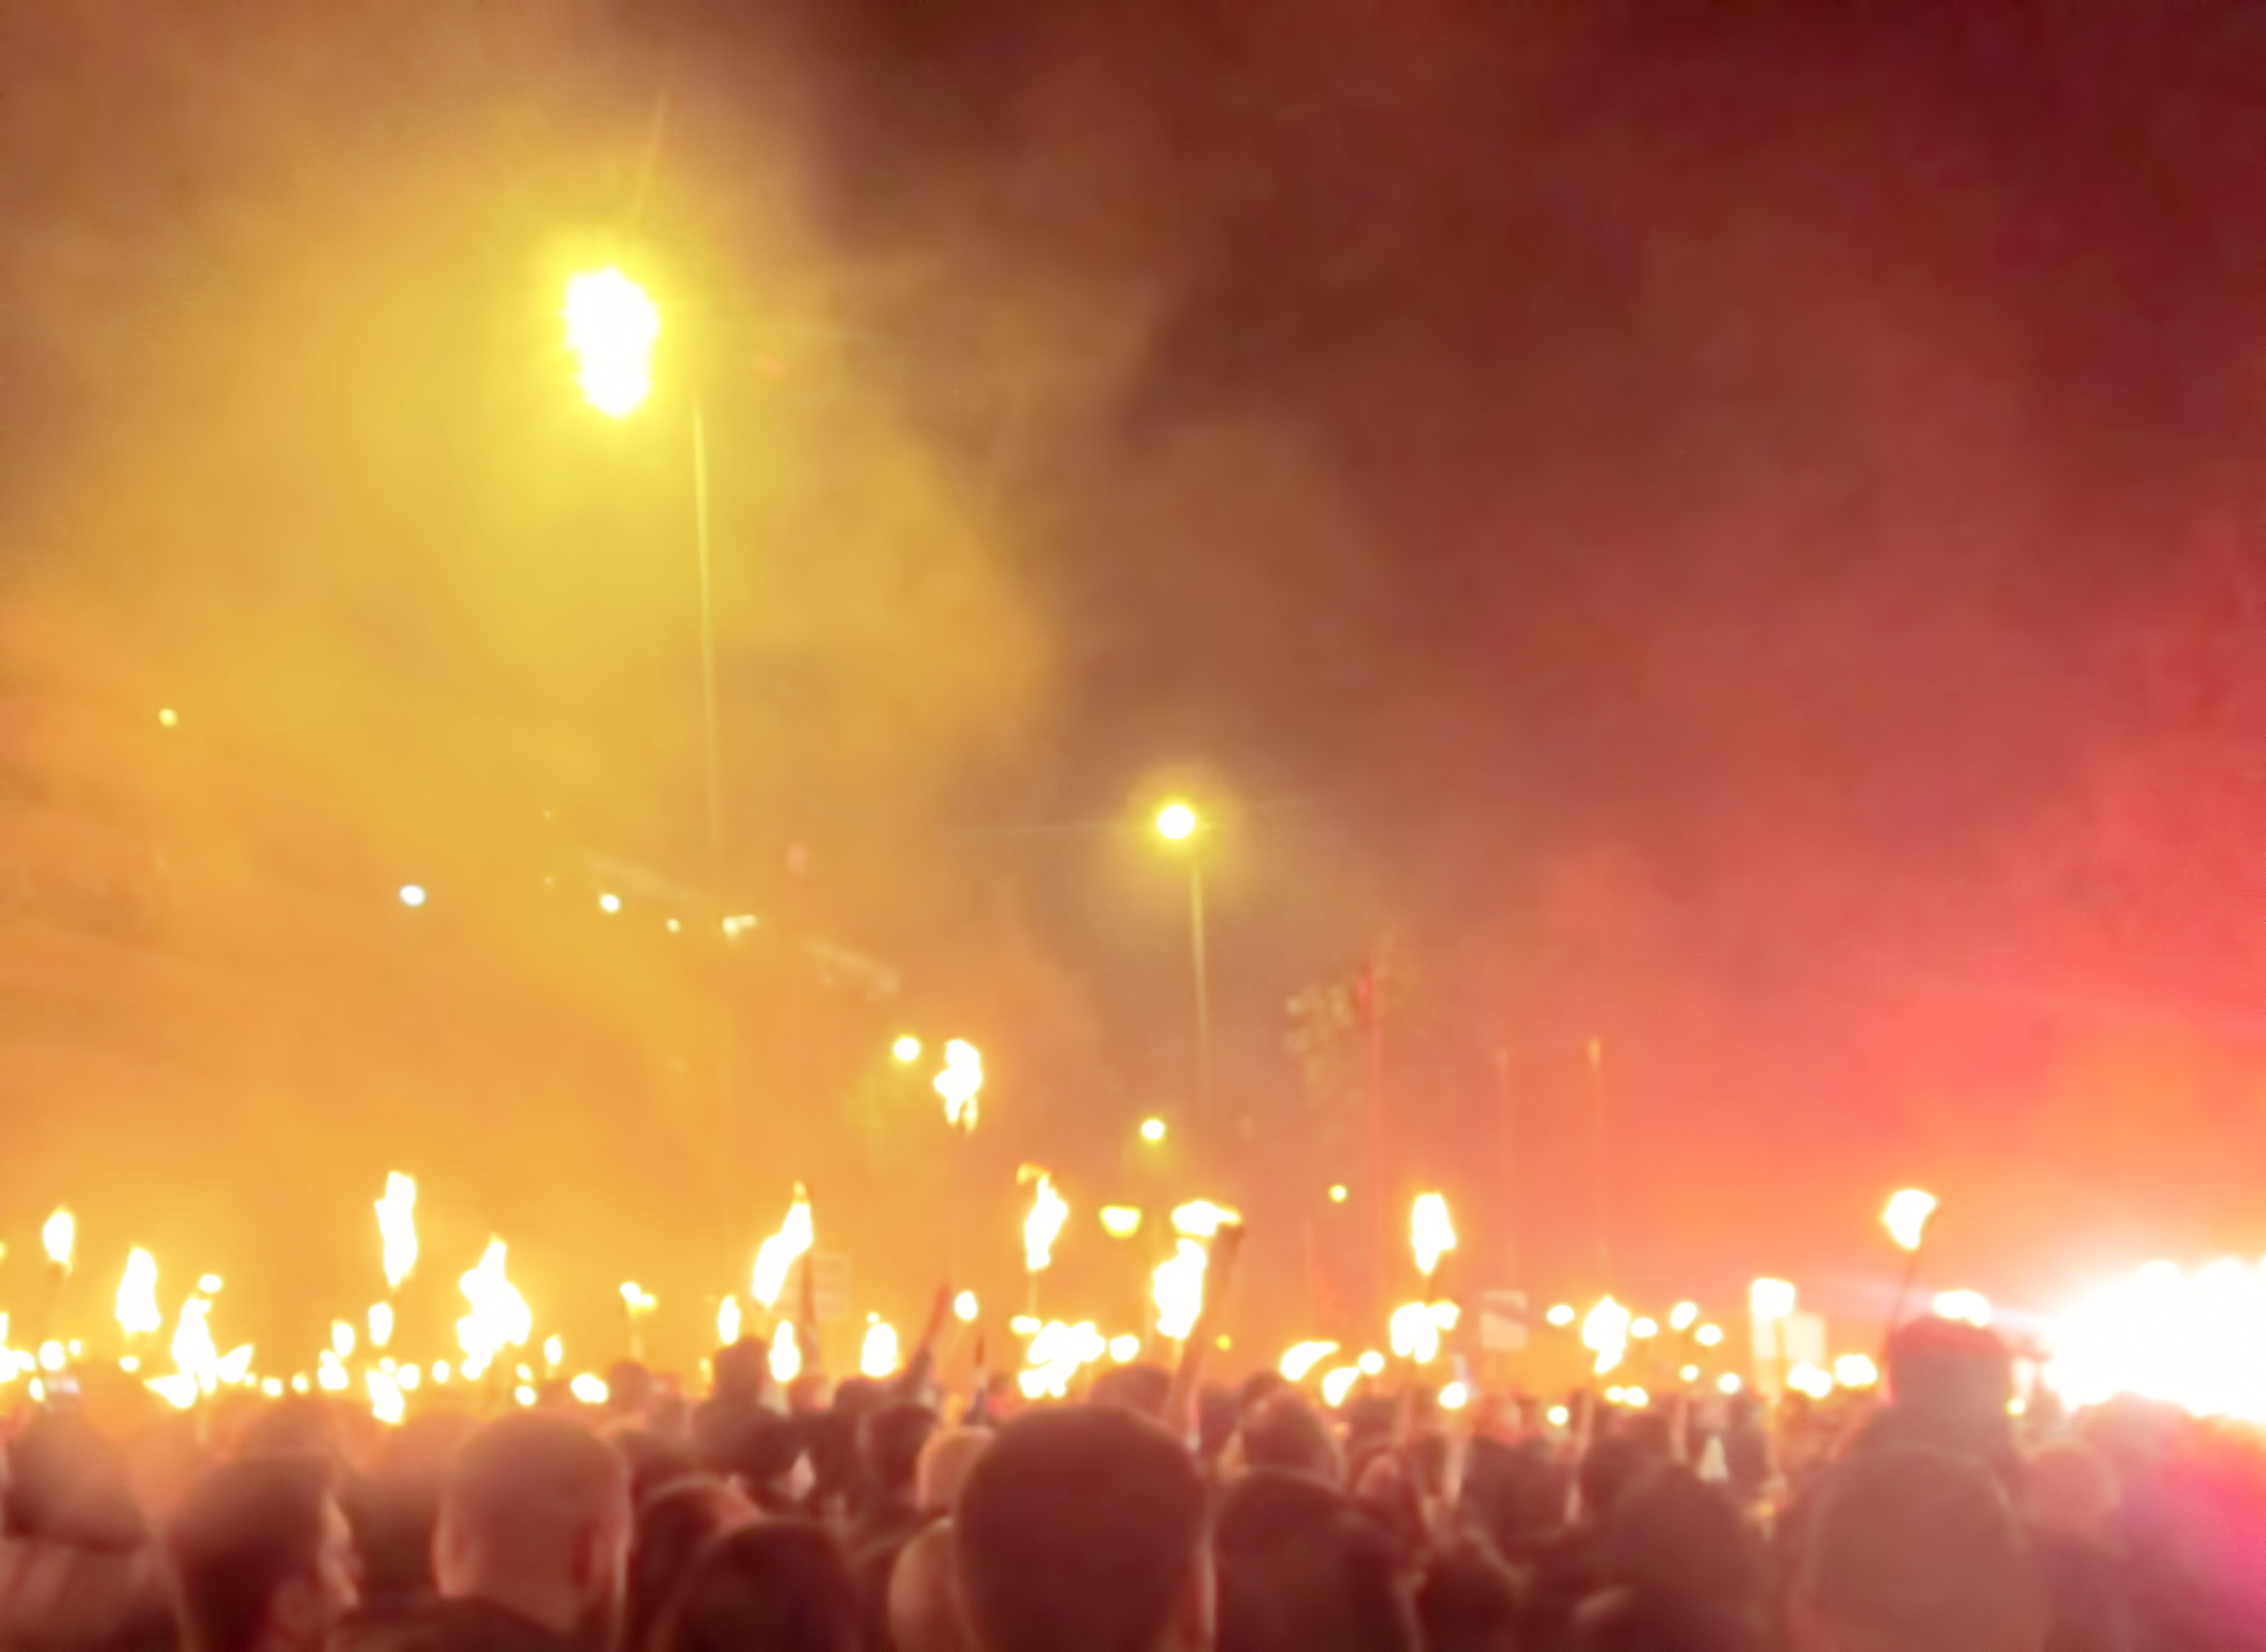 A crowd of anti-fascist protestors holding torches.